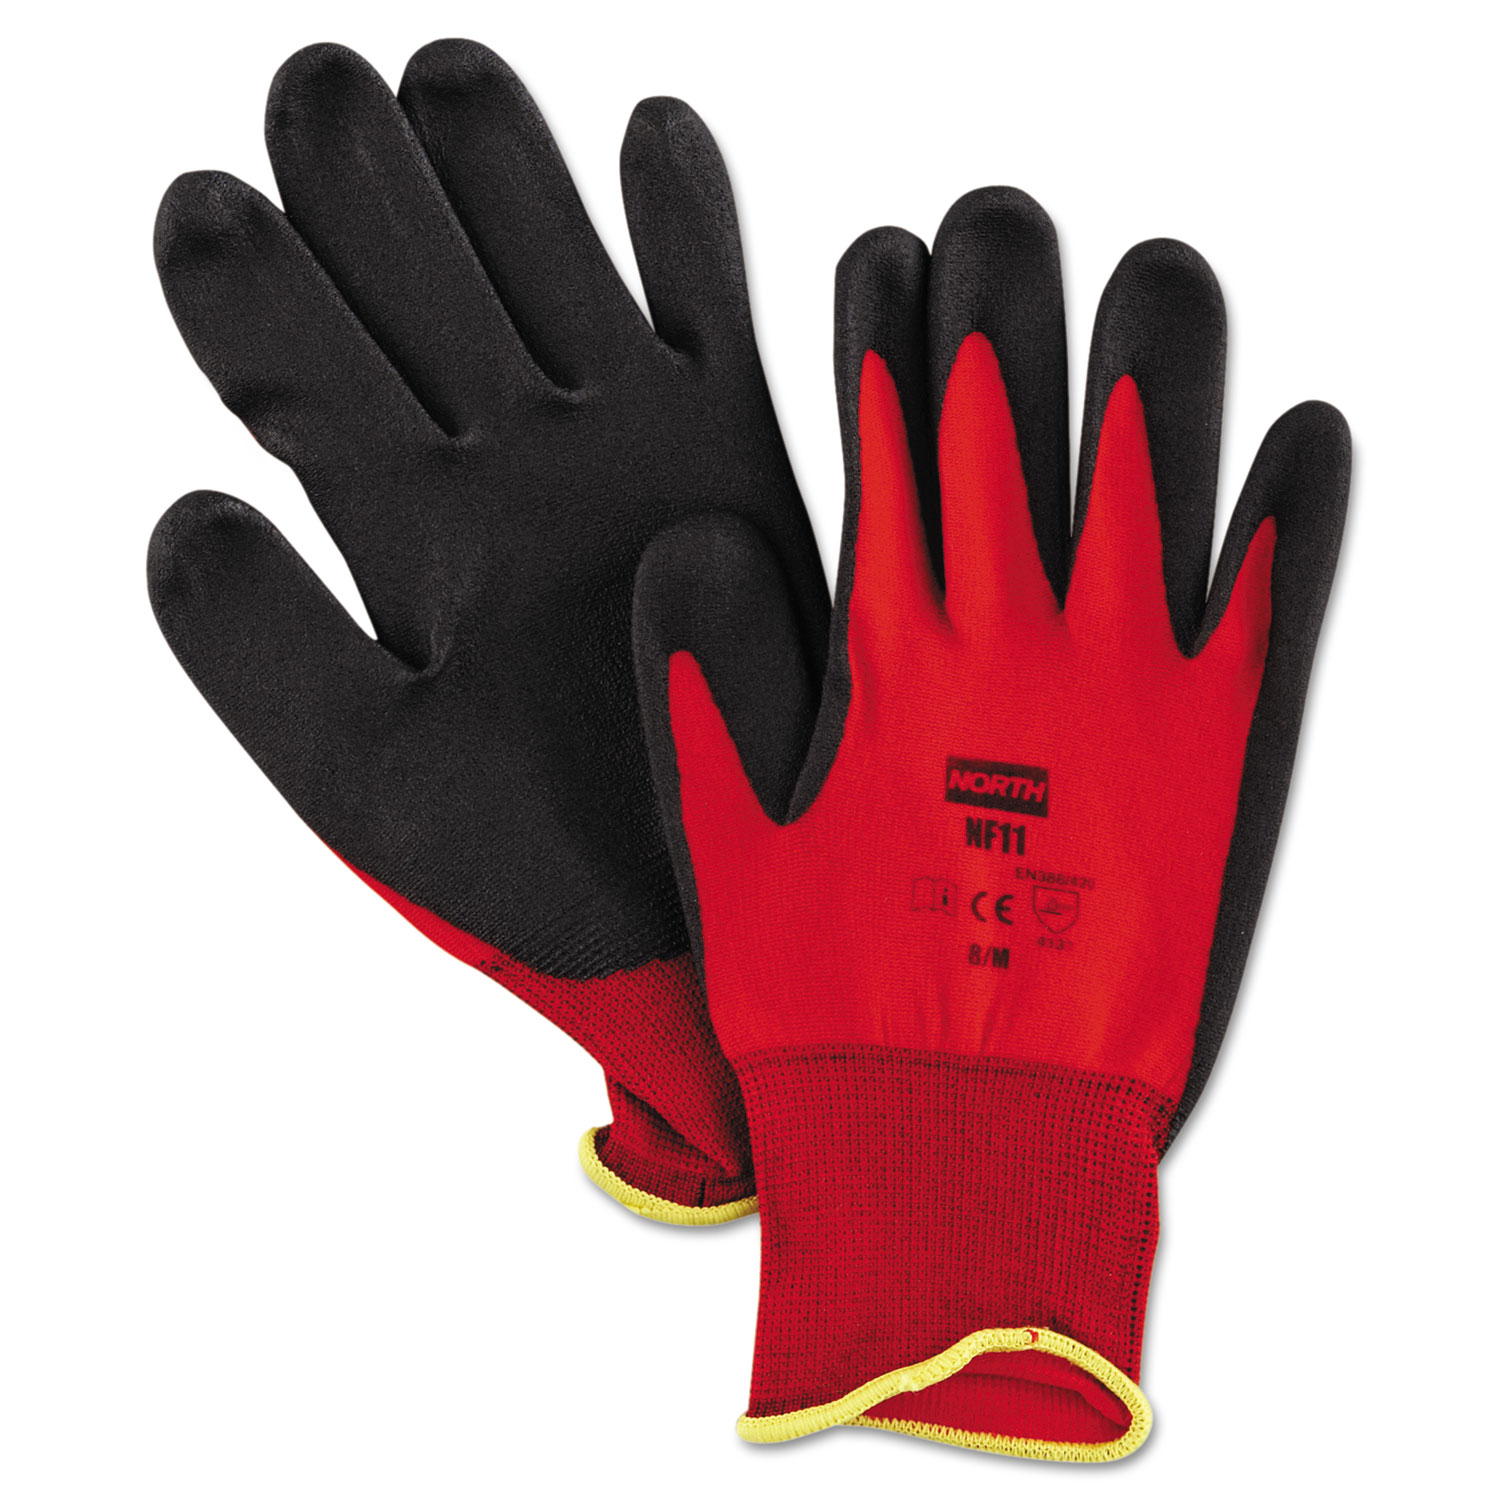  North Safety NF11/8M NorthFlex Red Foamed PVC Palm Coated Gloves, Medium (NSPNF118M) 